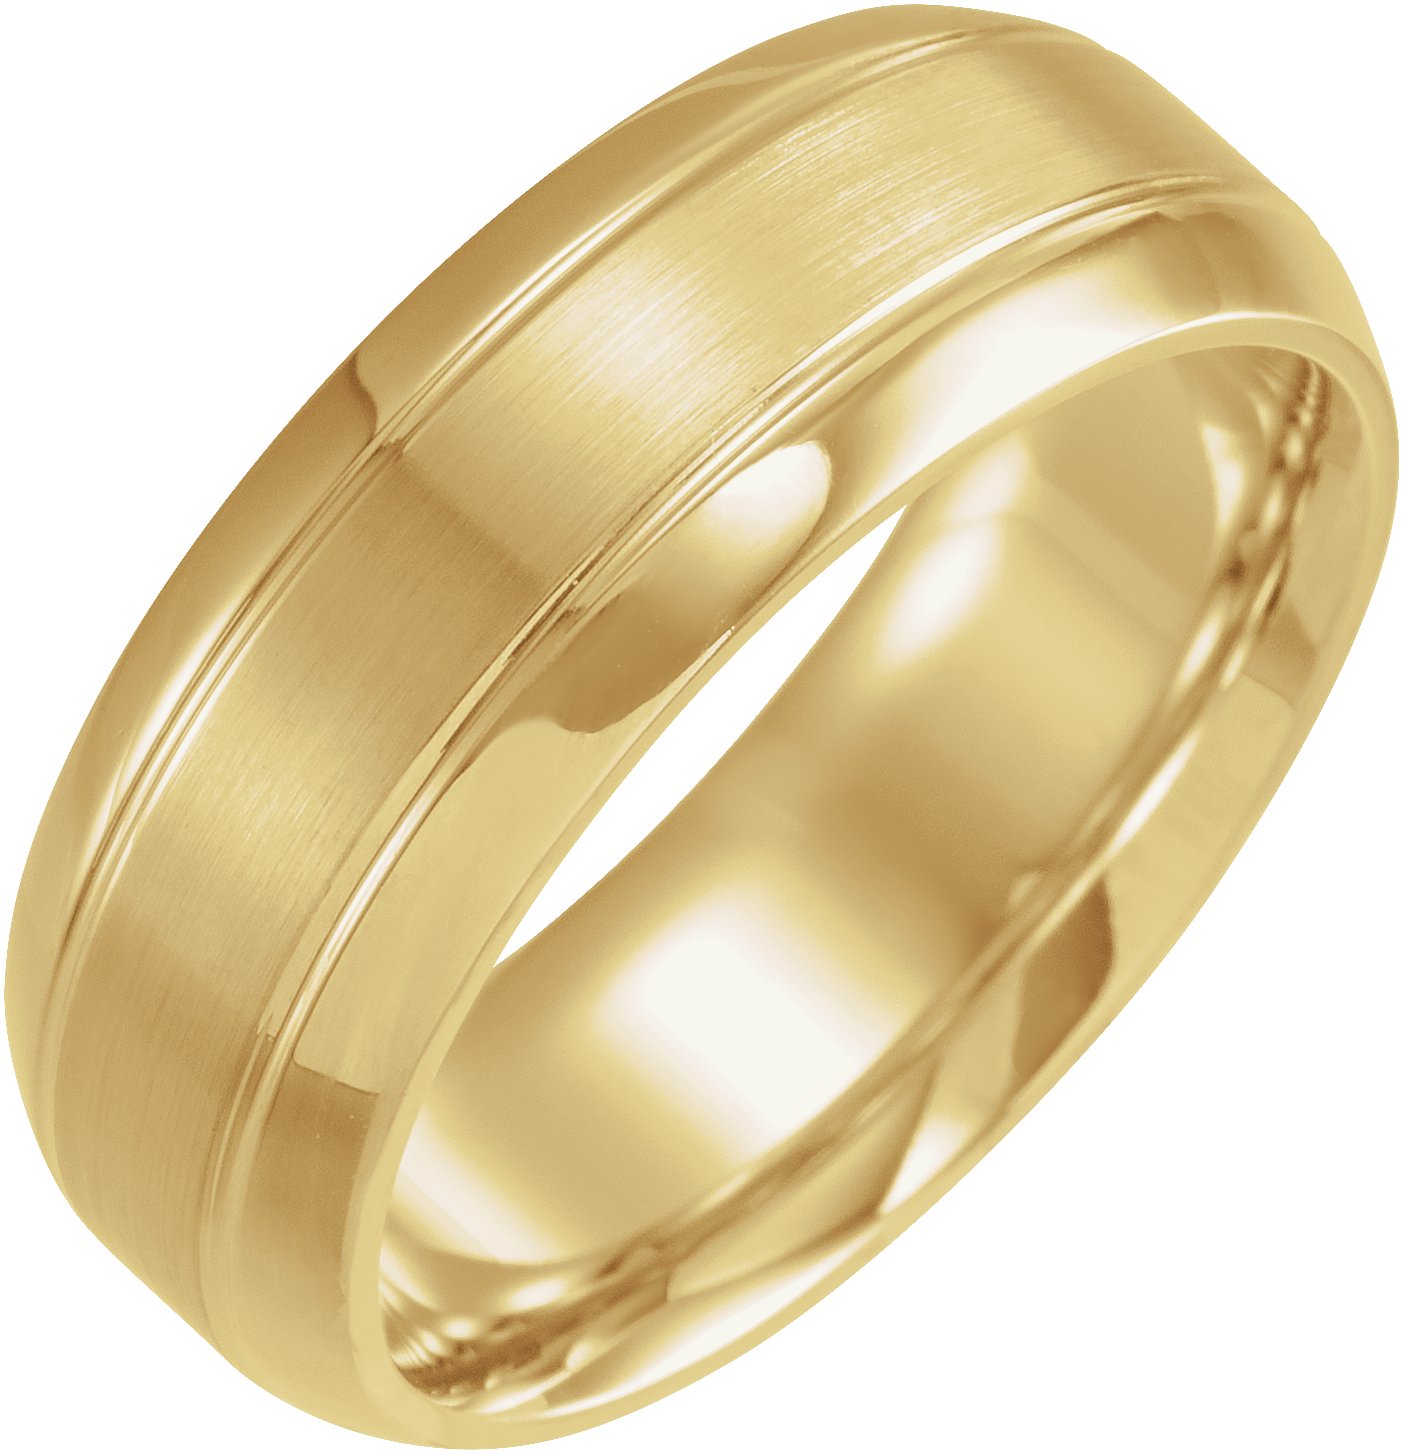 18K Yellow 8 mm Grooved Beveled-Edge Band Size 12